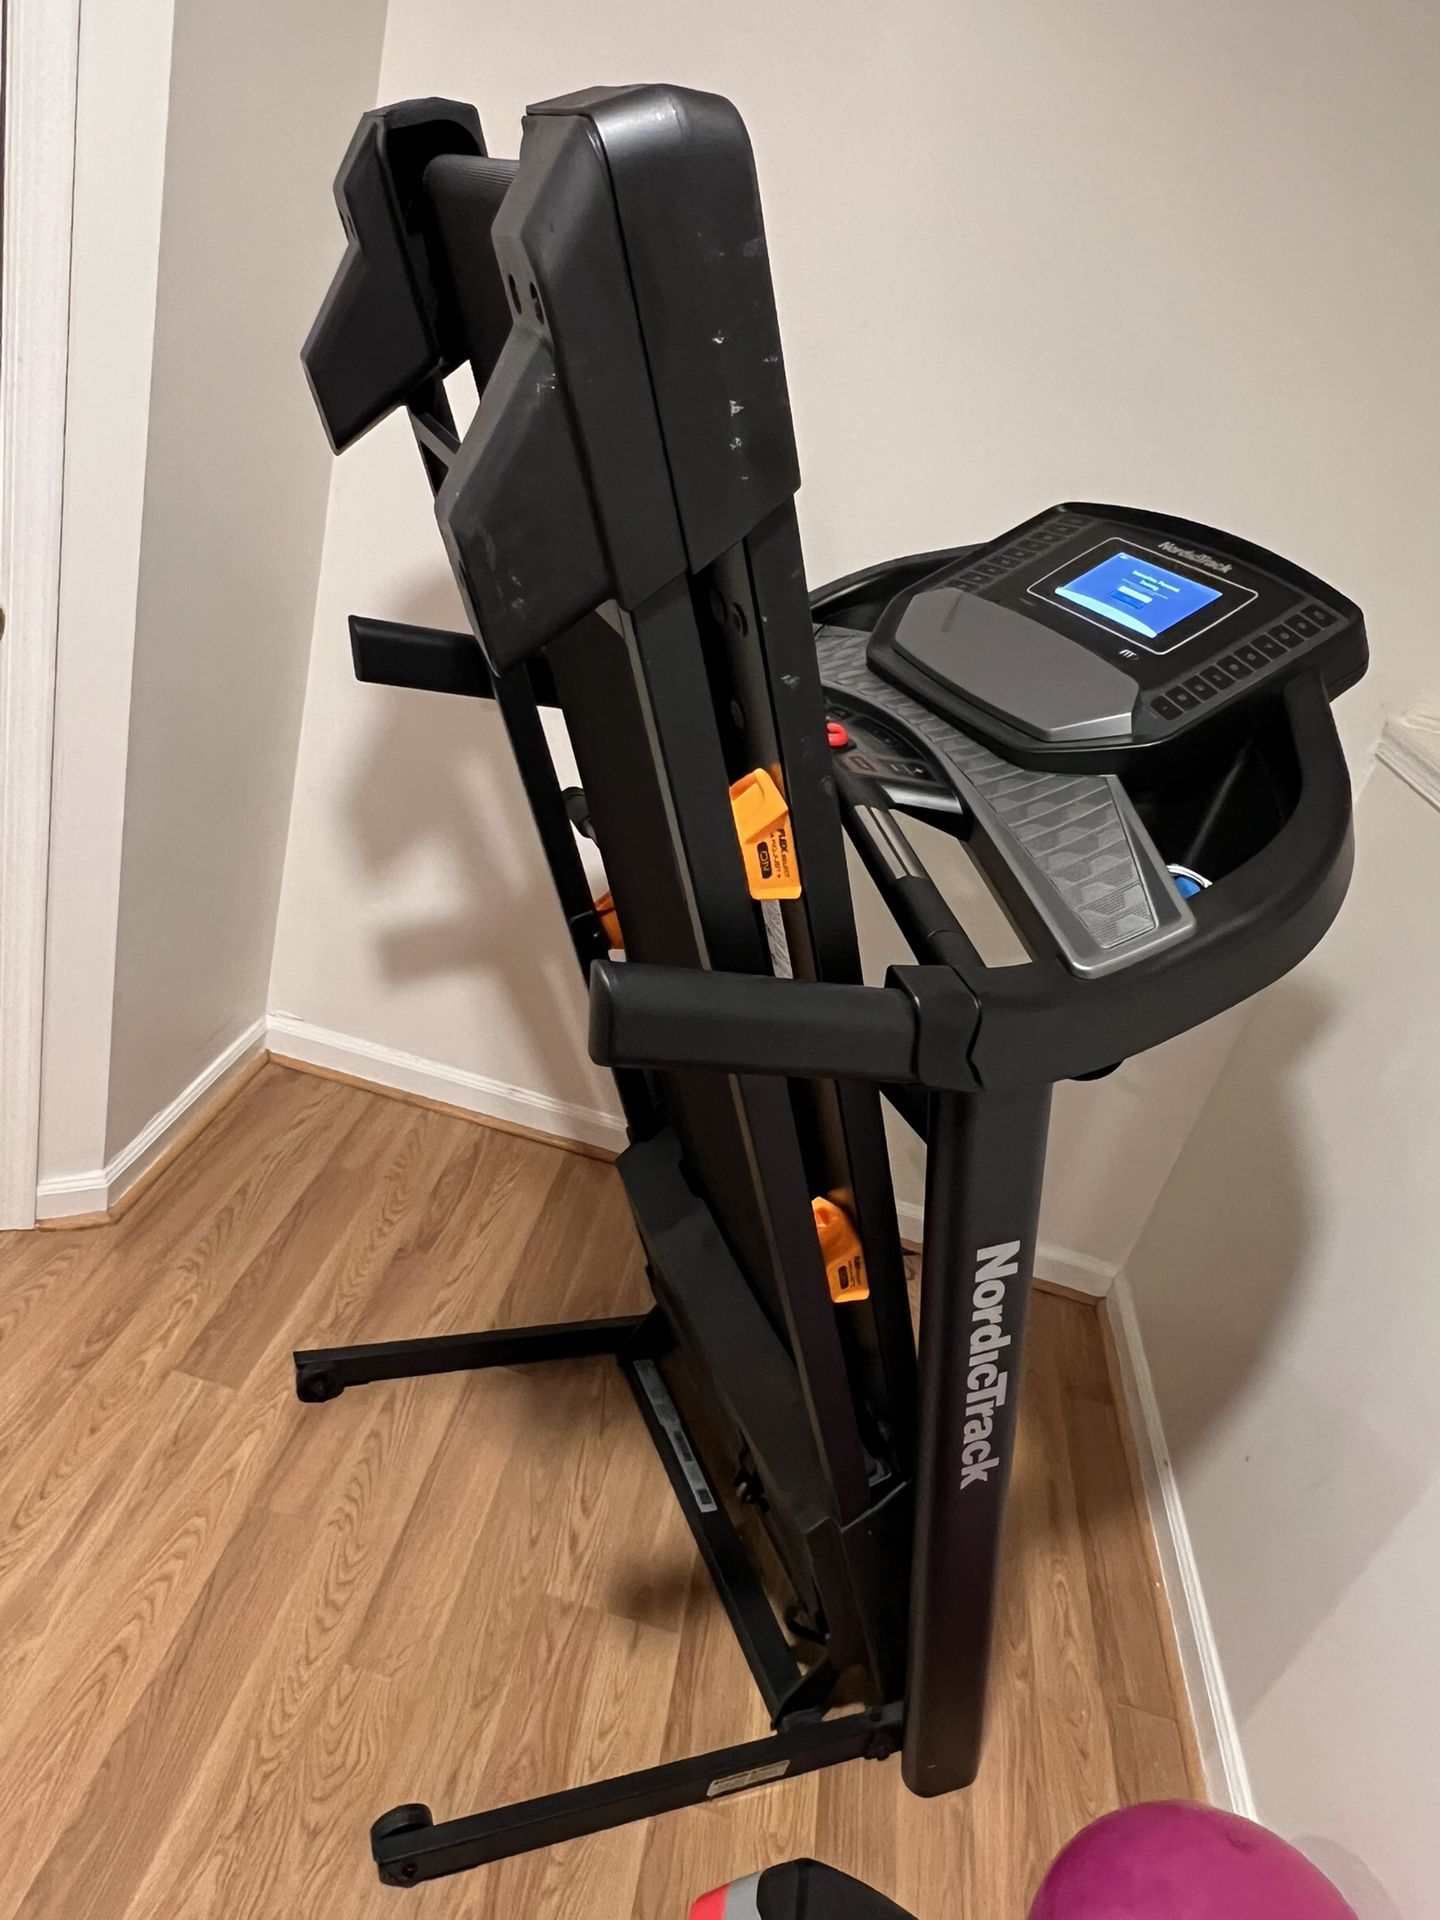 NordicTrack C 700 Folding Treadmill with 7” Interactive Touchscreen